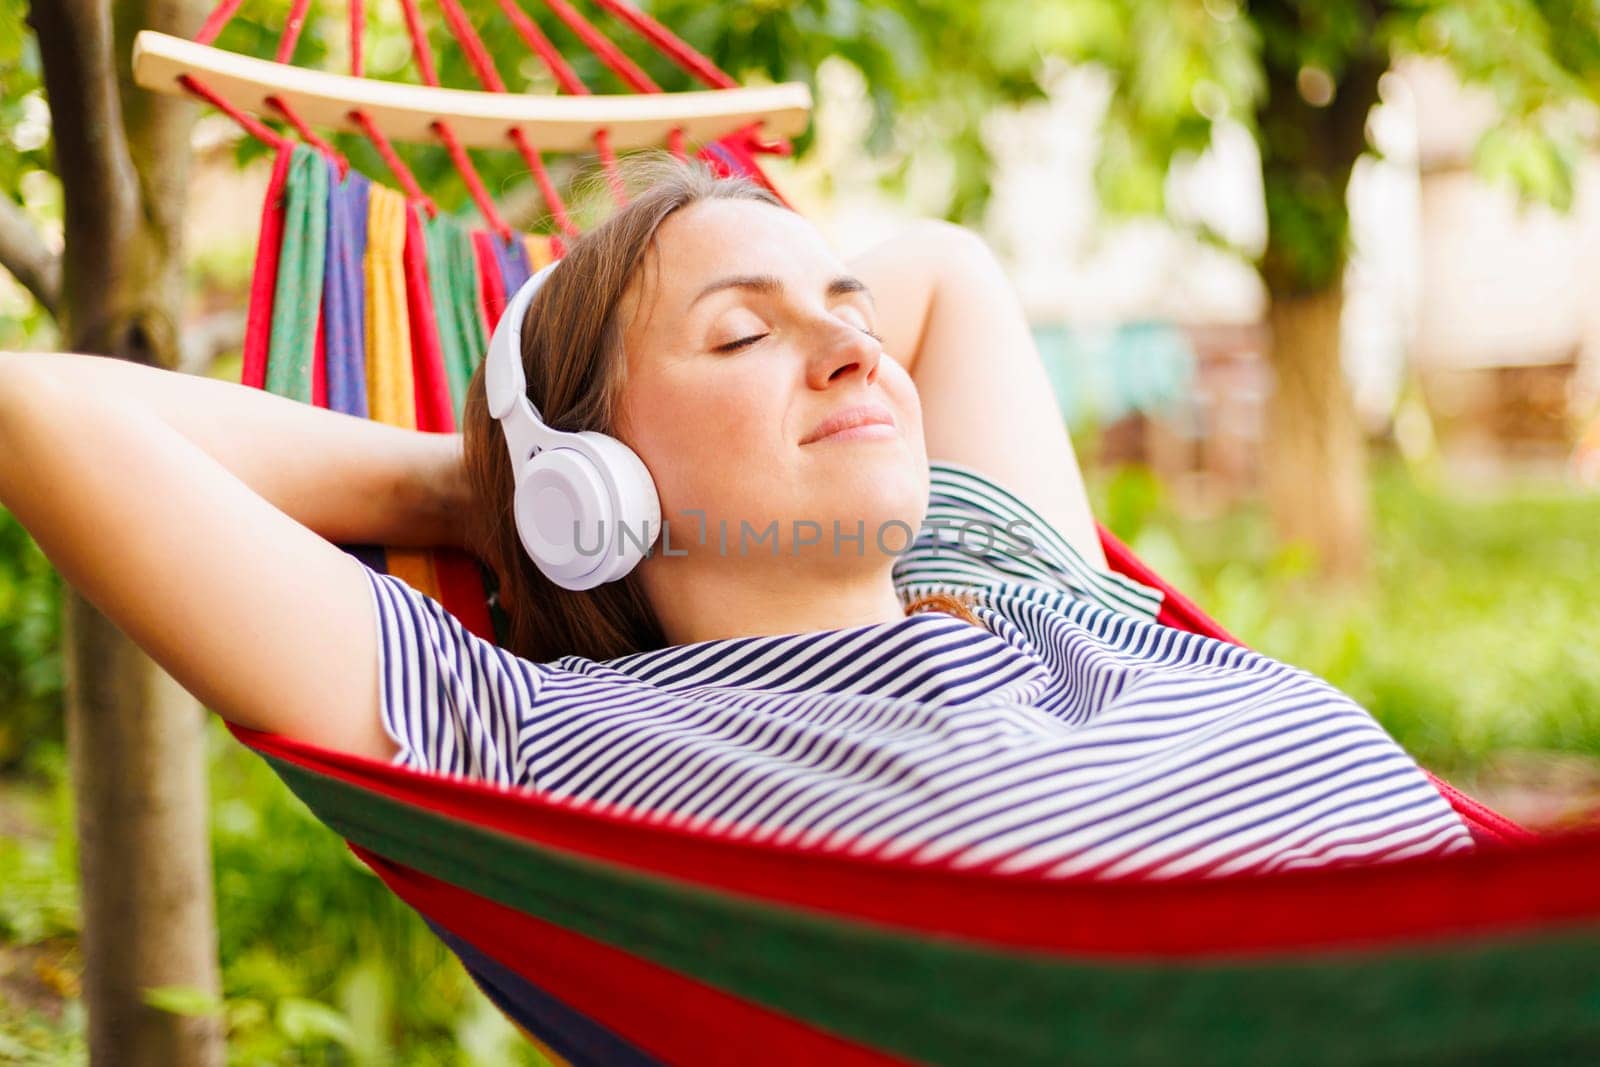 Young woman in headphones listening to music while resting in hammock outdoors.